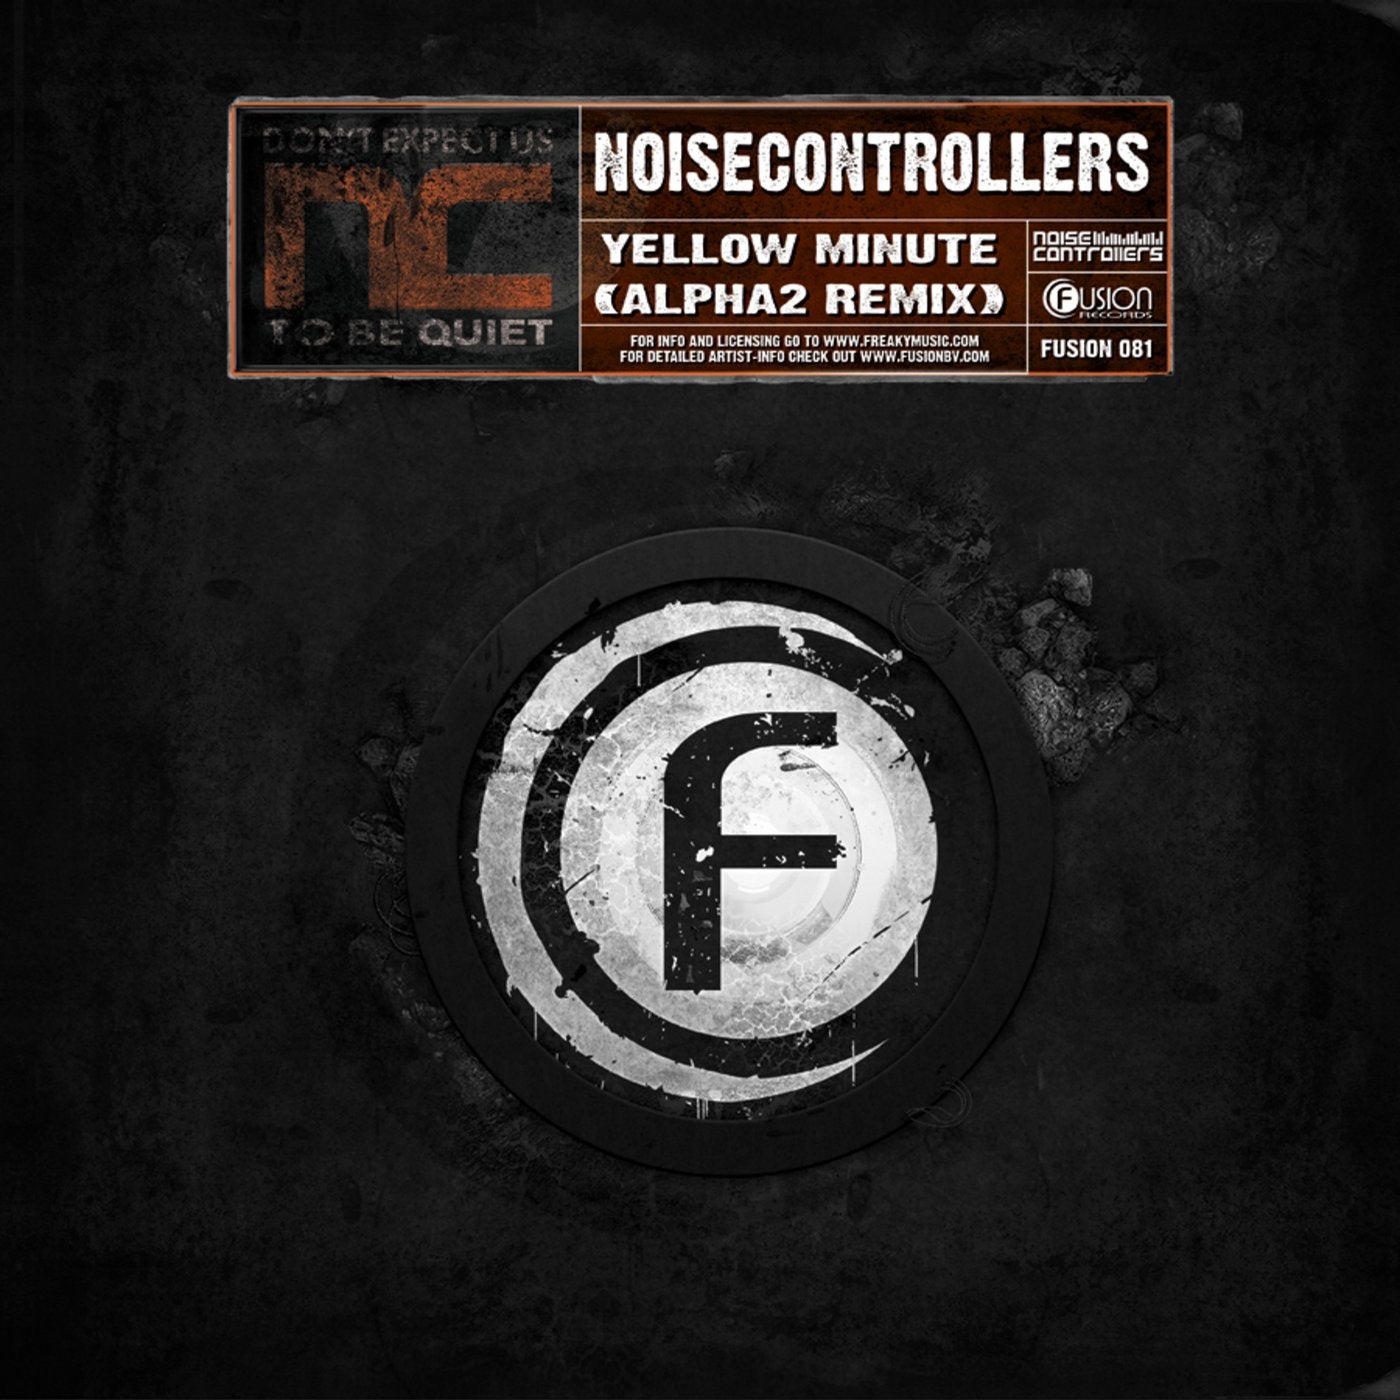 Faster farther. Noisecontrollers. Drop альбомы. Fusion Bomb.